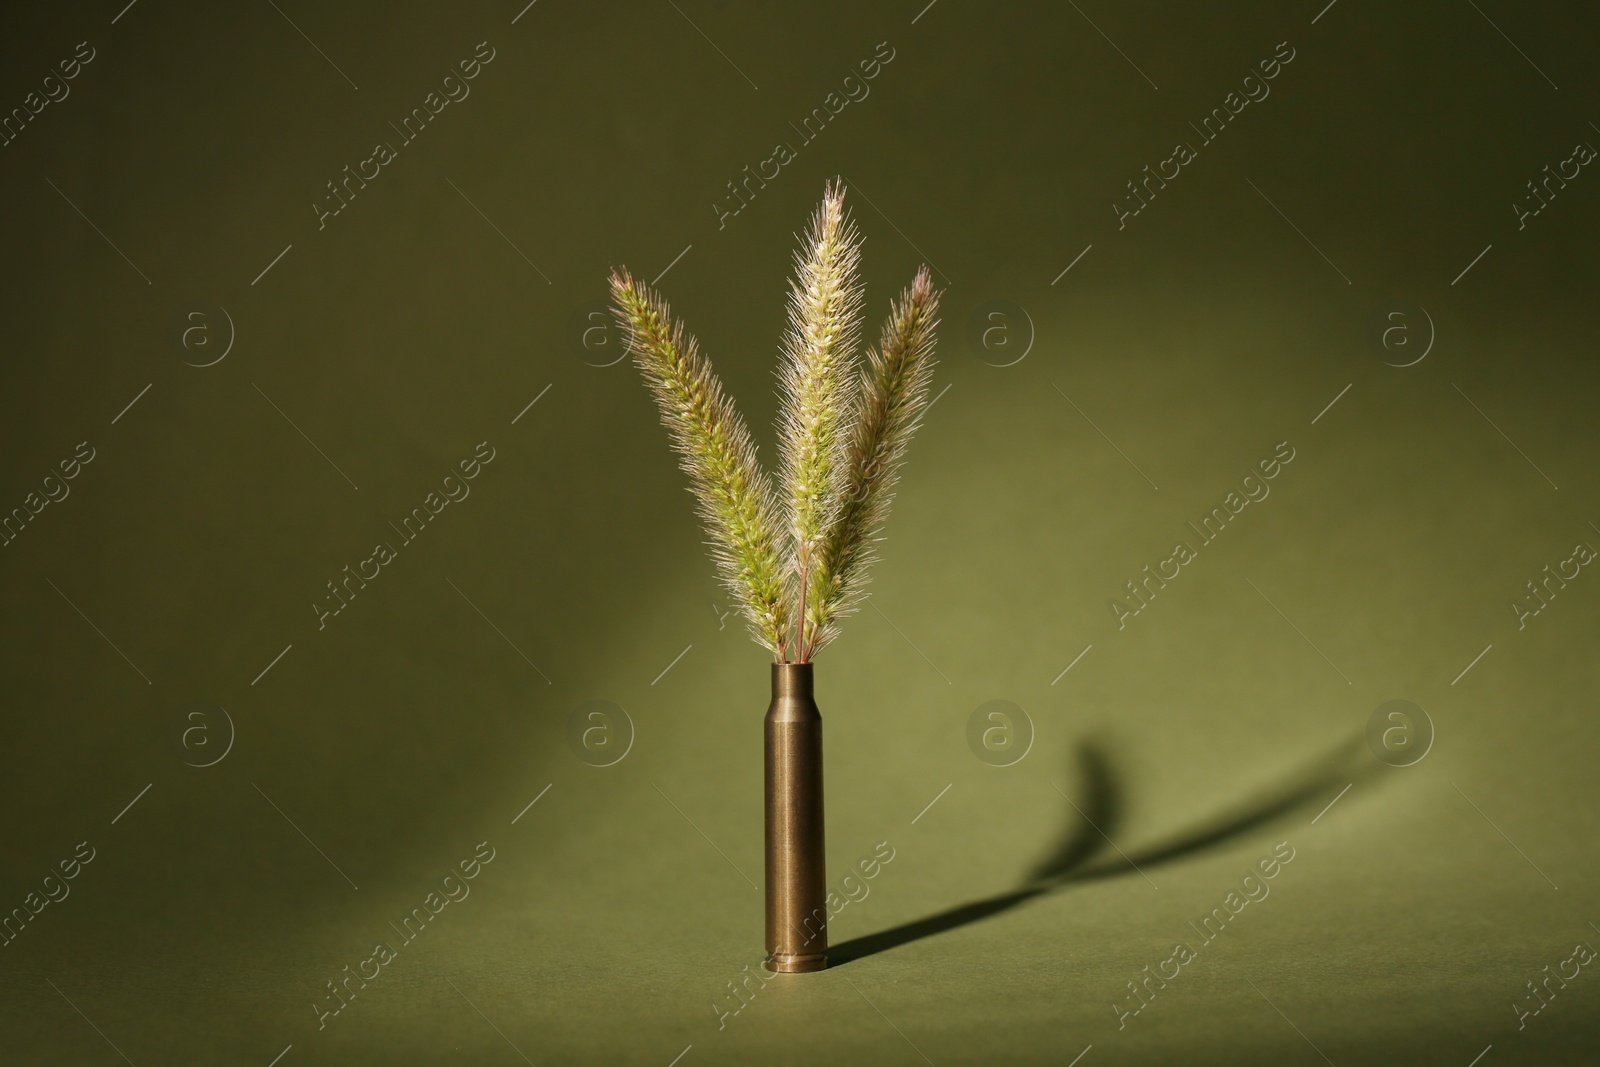 Photo of Bullet cartridge case and green foxtails on color background